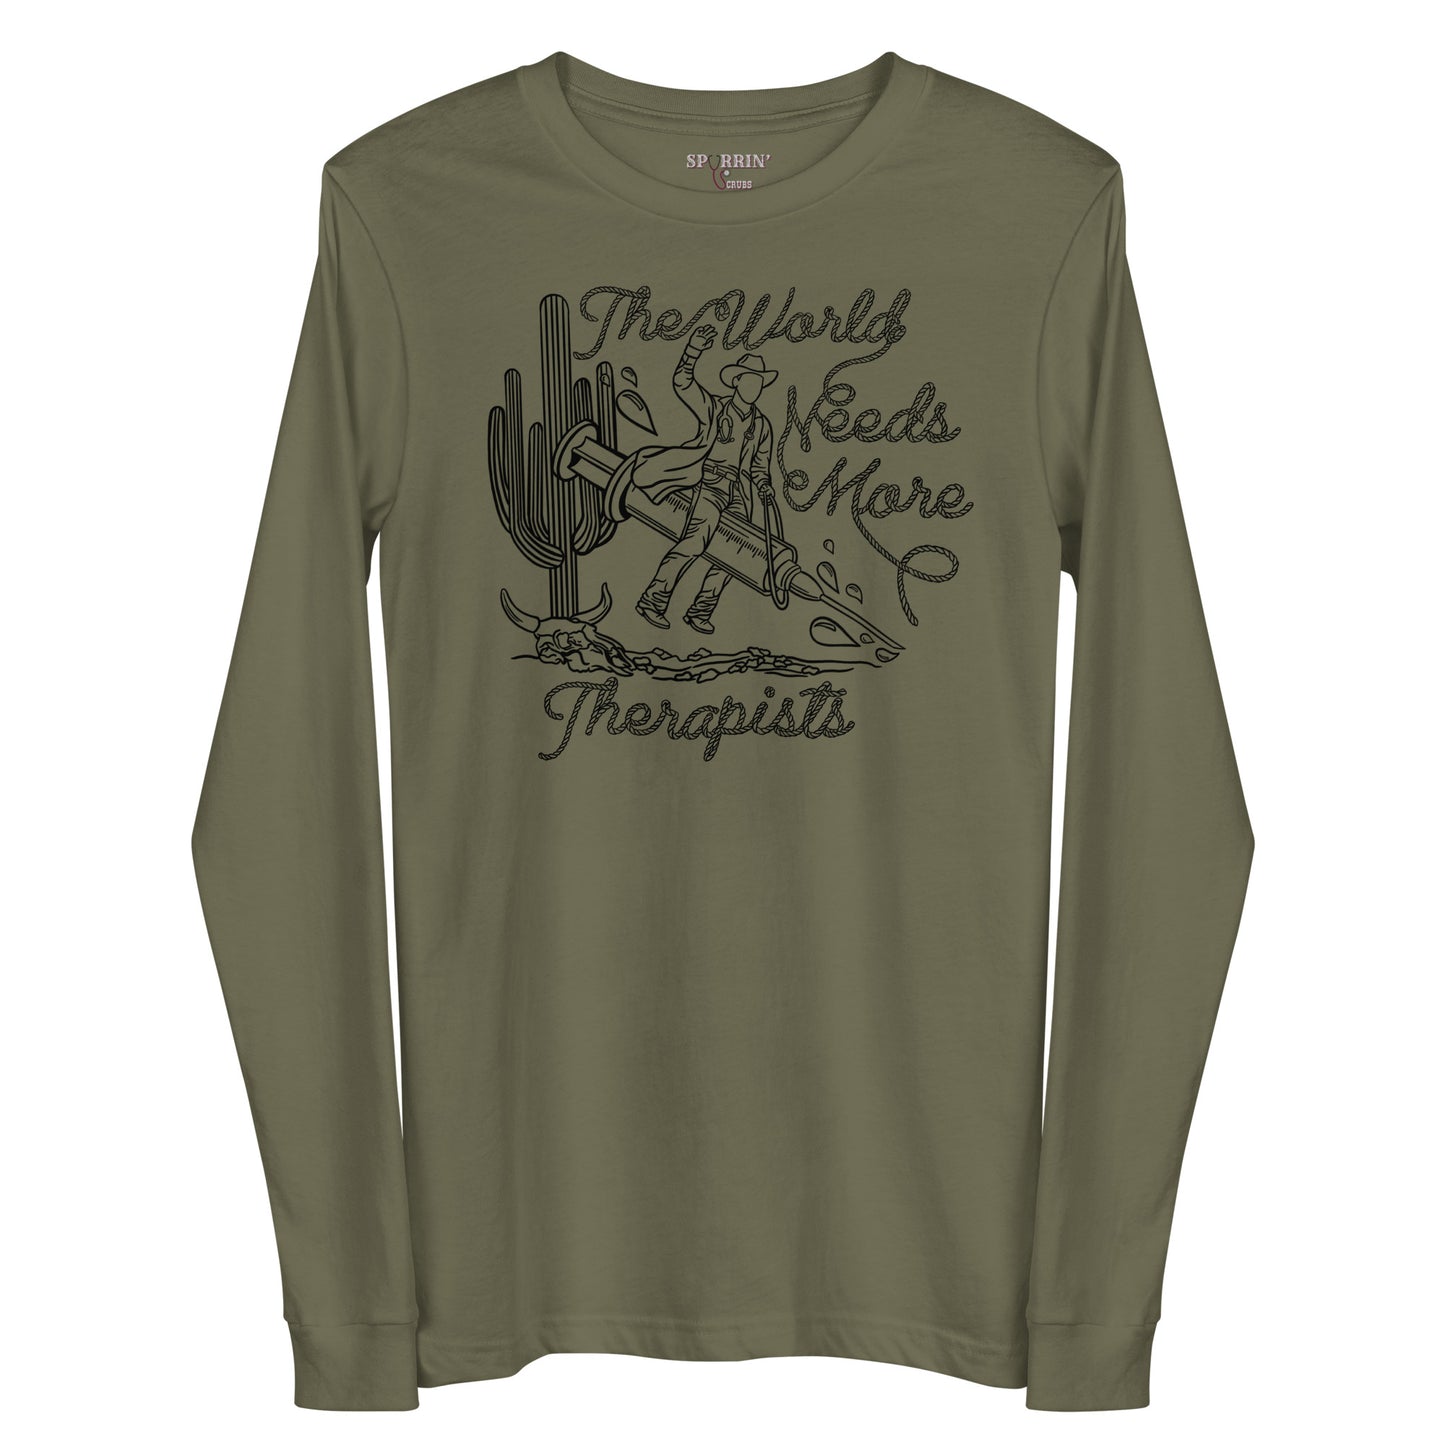 TWNM- Therapists Long Sleeve T-Shirt Light Colors